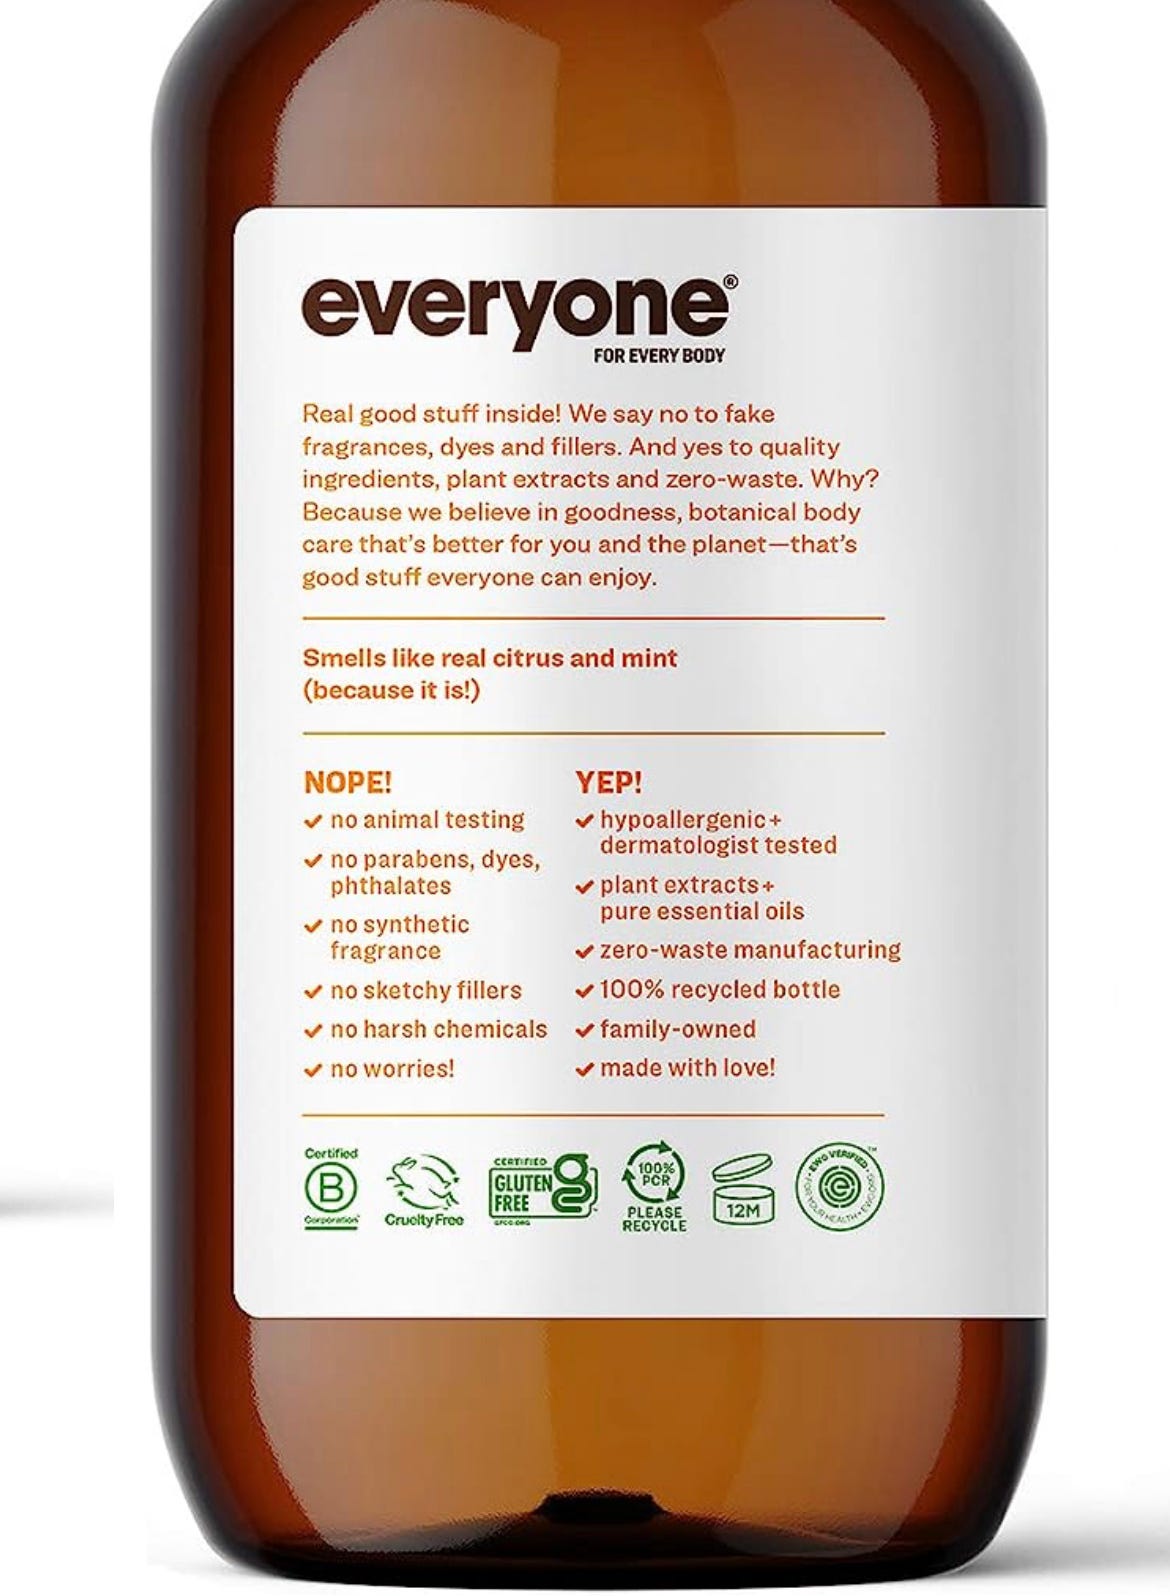 Picture shows the backside of a bottle of Everyone 3-in-1 soap. The bottle says: Real good stuff inside! We say no to fake fragrances, dyes and fillers. And yes to quality ingredients, plant extracts and zero-waste. Why? Because we believe in goodness, botanical body care that's better for the planet--that's good stuff everyone can enjoy. Smells like real citrust and mint (because it is!). The rest of the bottle has two lists, one labeled "nope" with all the things the soap doesn't contain, and the other labeled "yep" with the ingredients/values the brand does stand for.